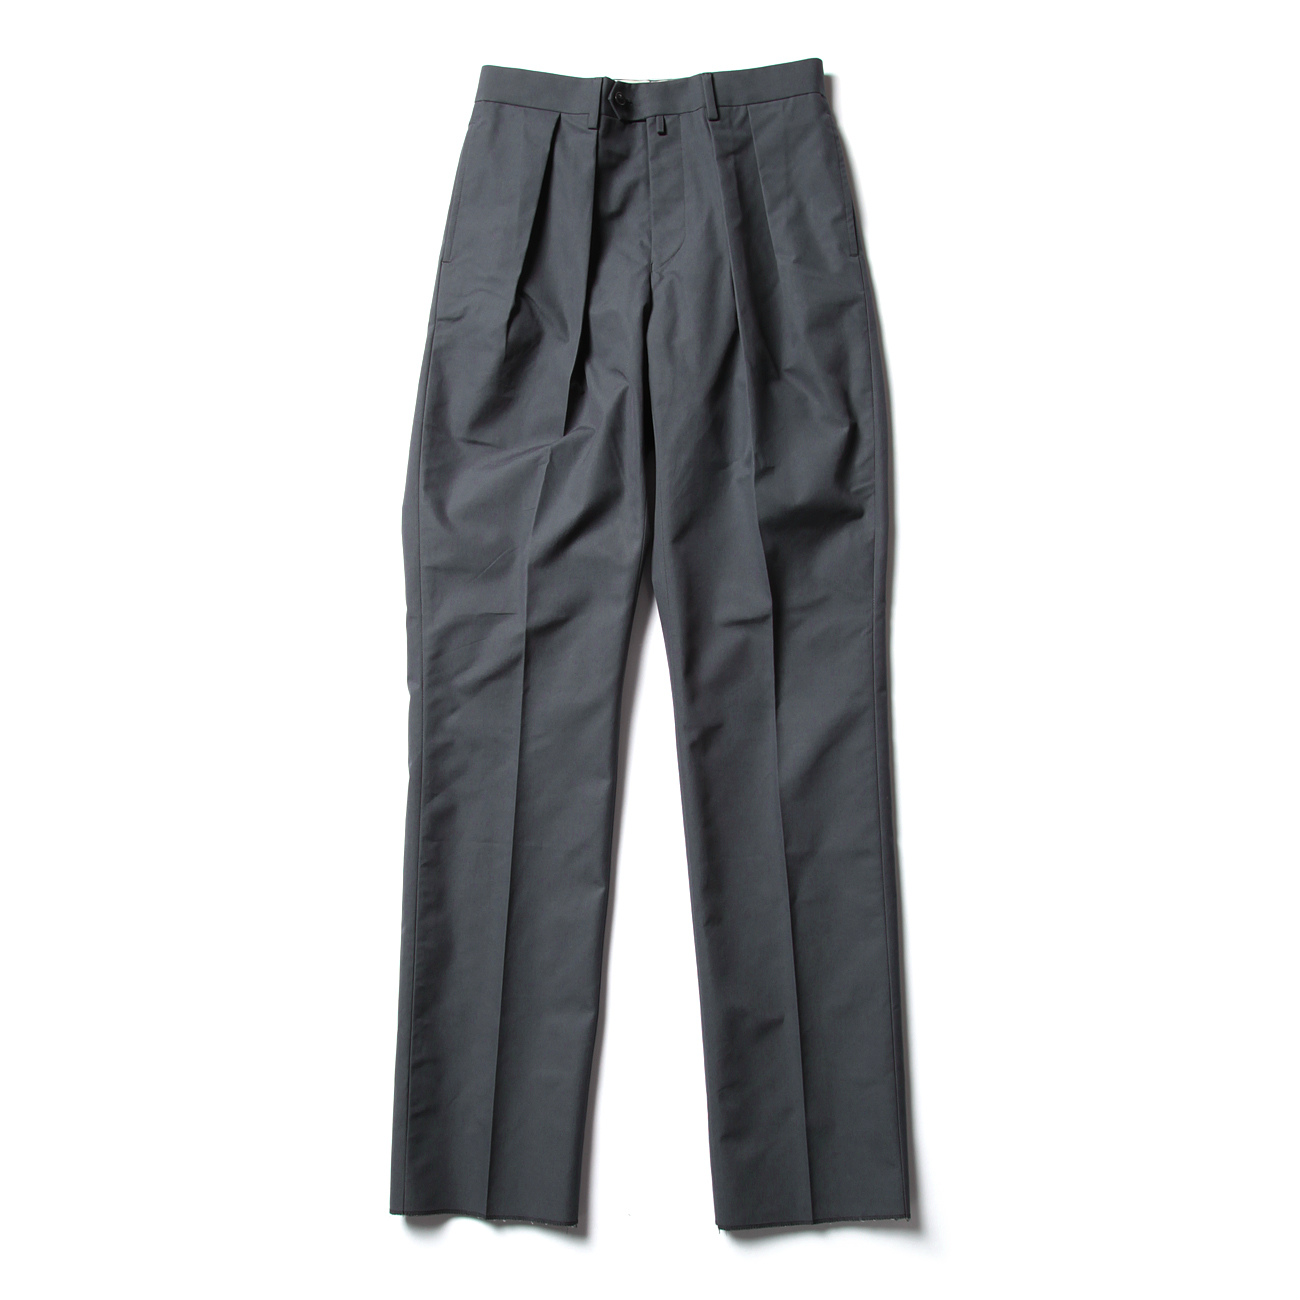 England Ventile / Standard - Charcoal